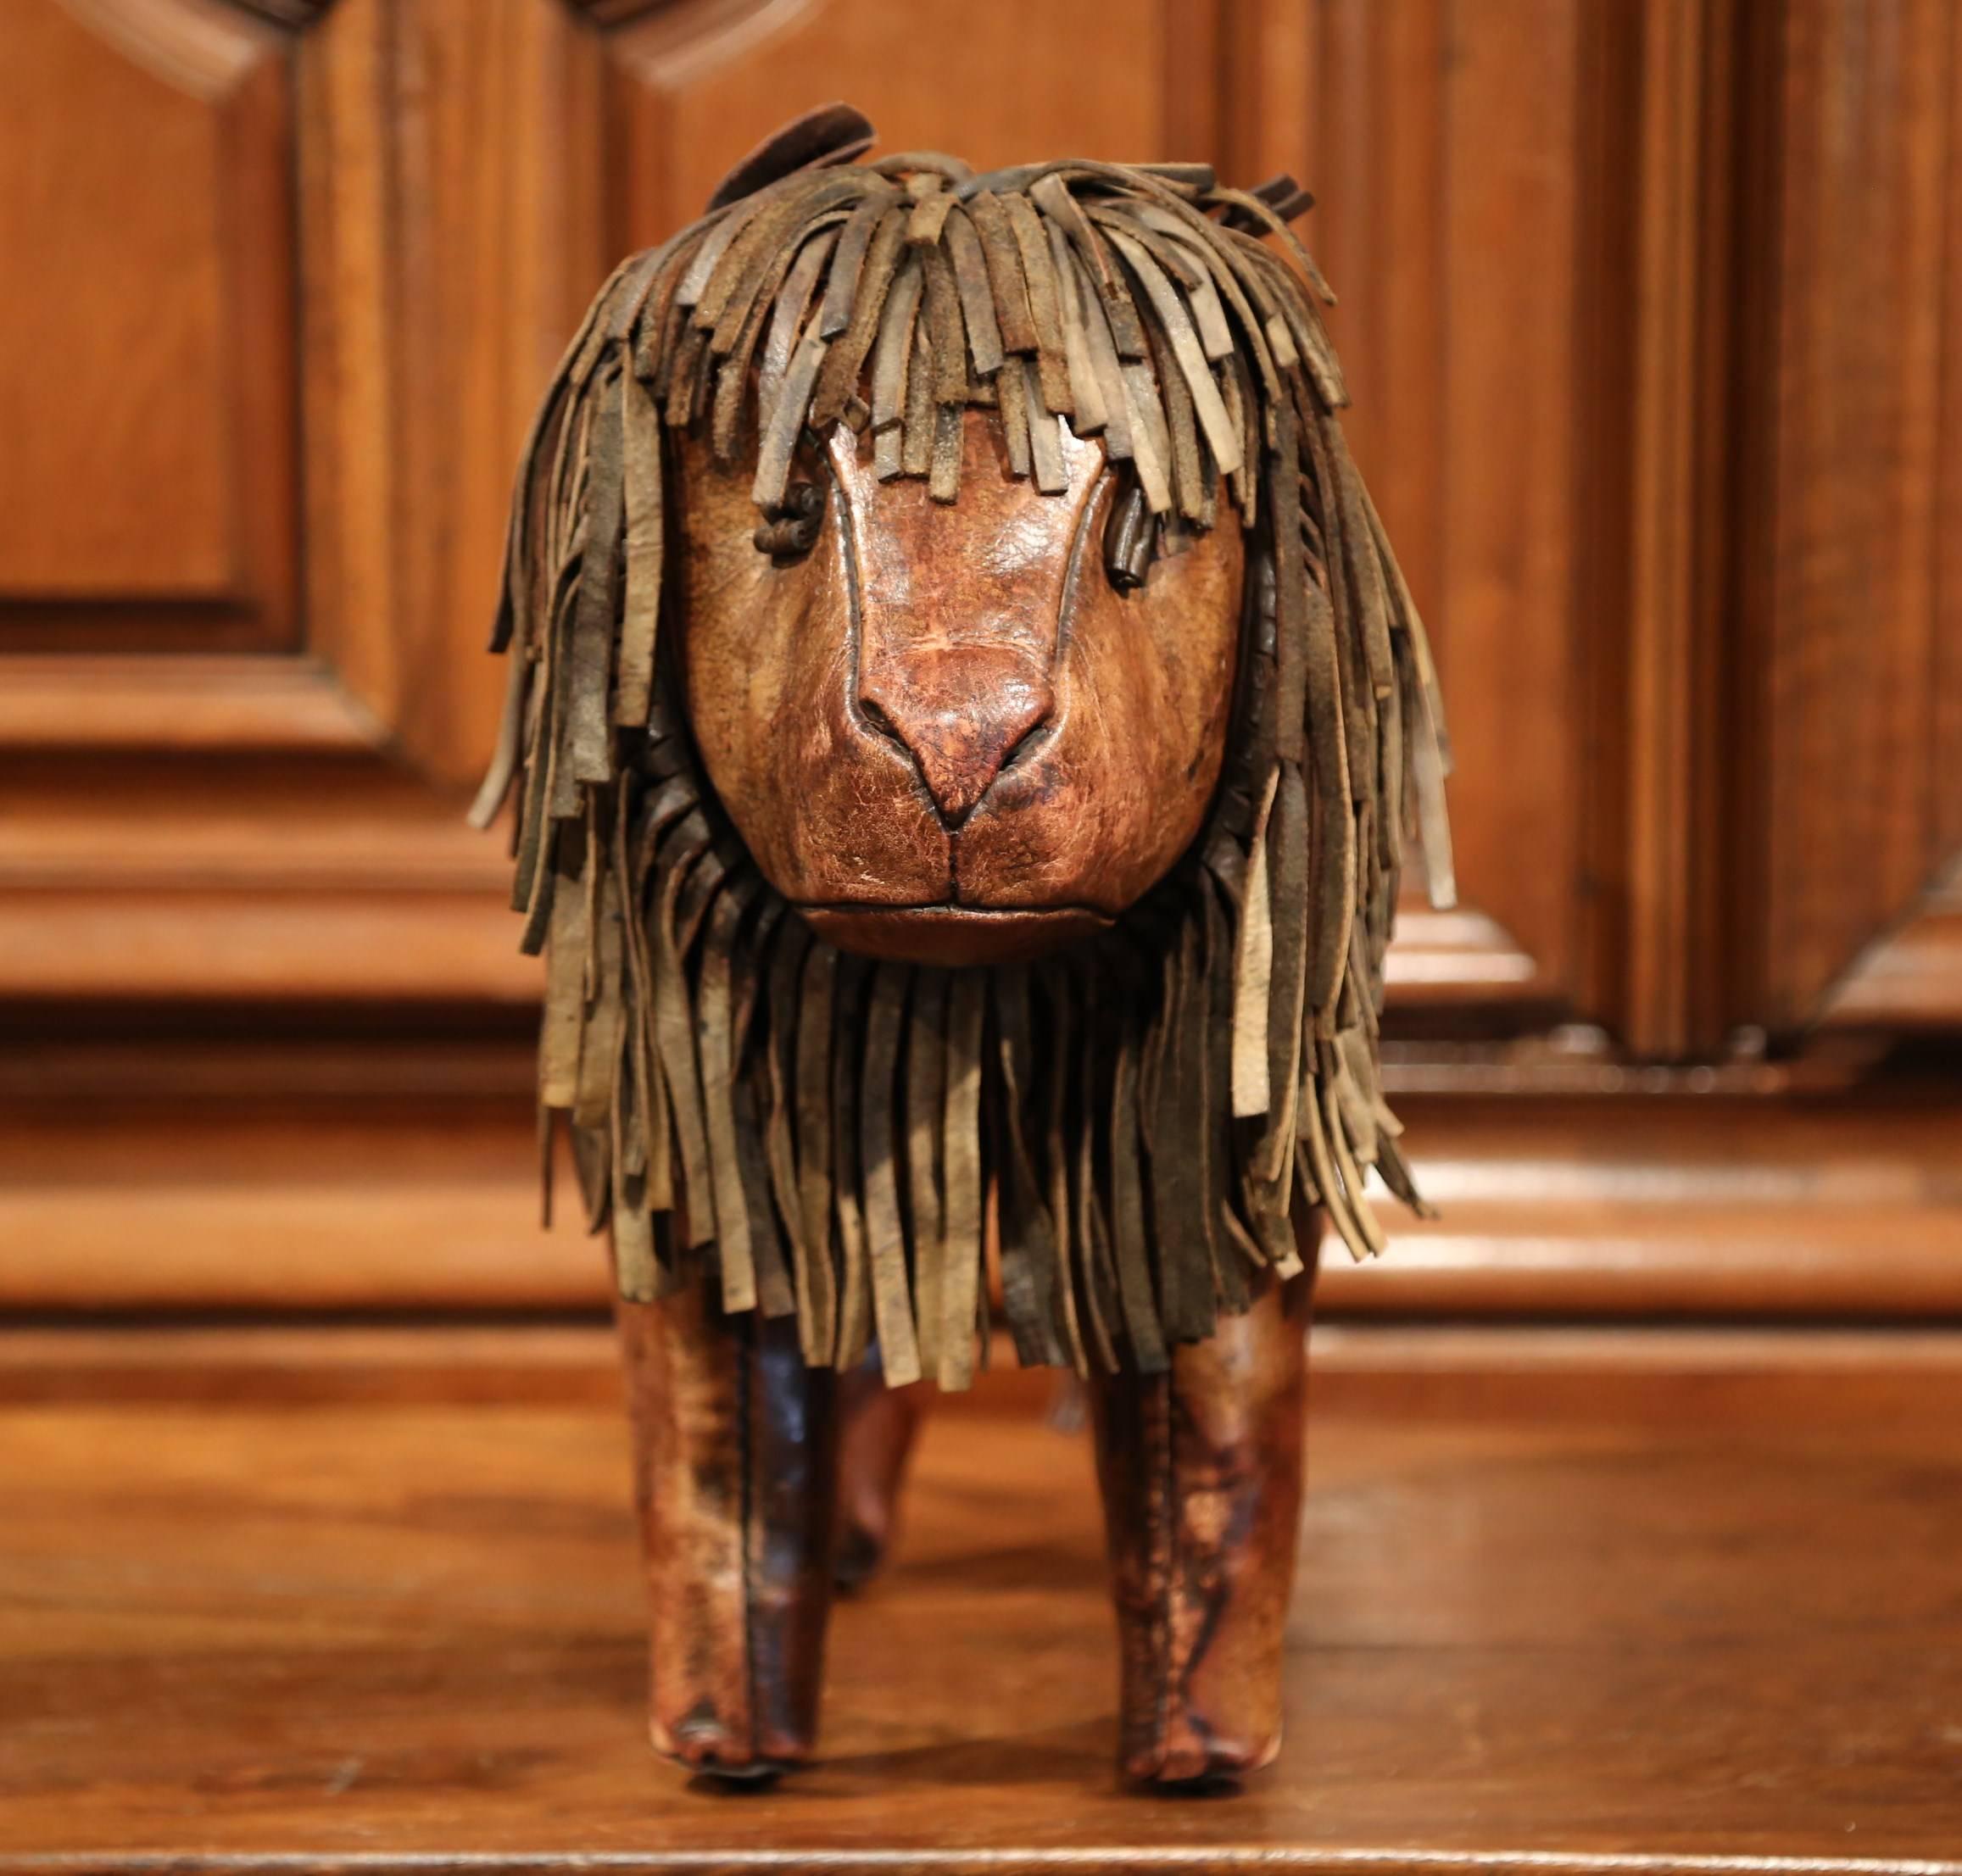 Patinated 19th century English Foot Stool Lion Sculpture with Original Brown Leather